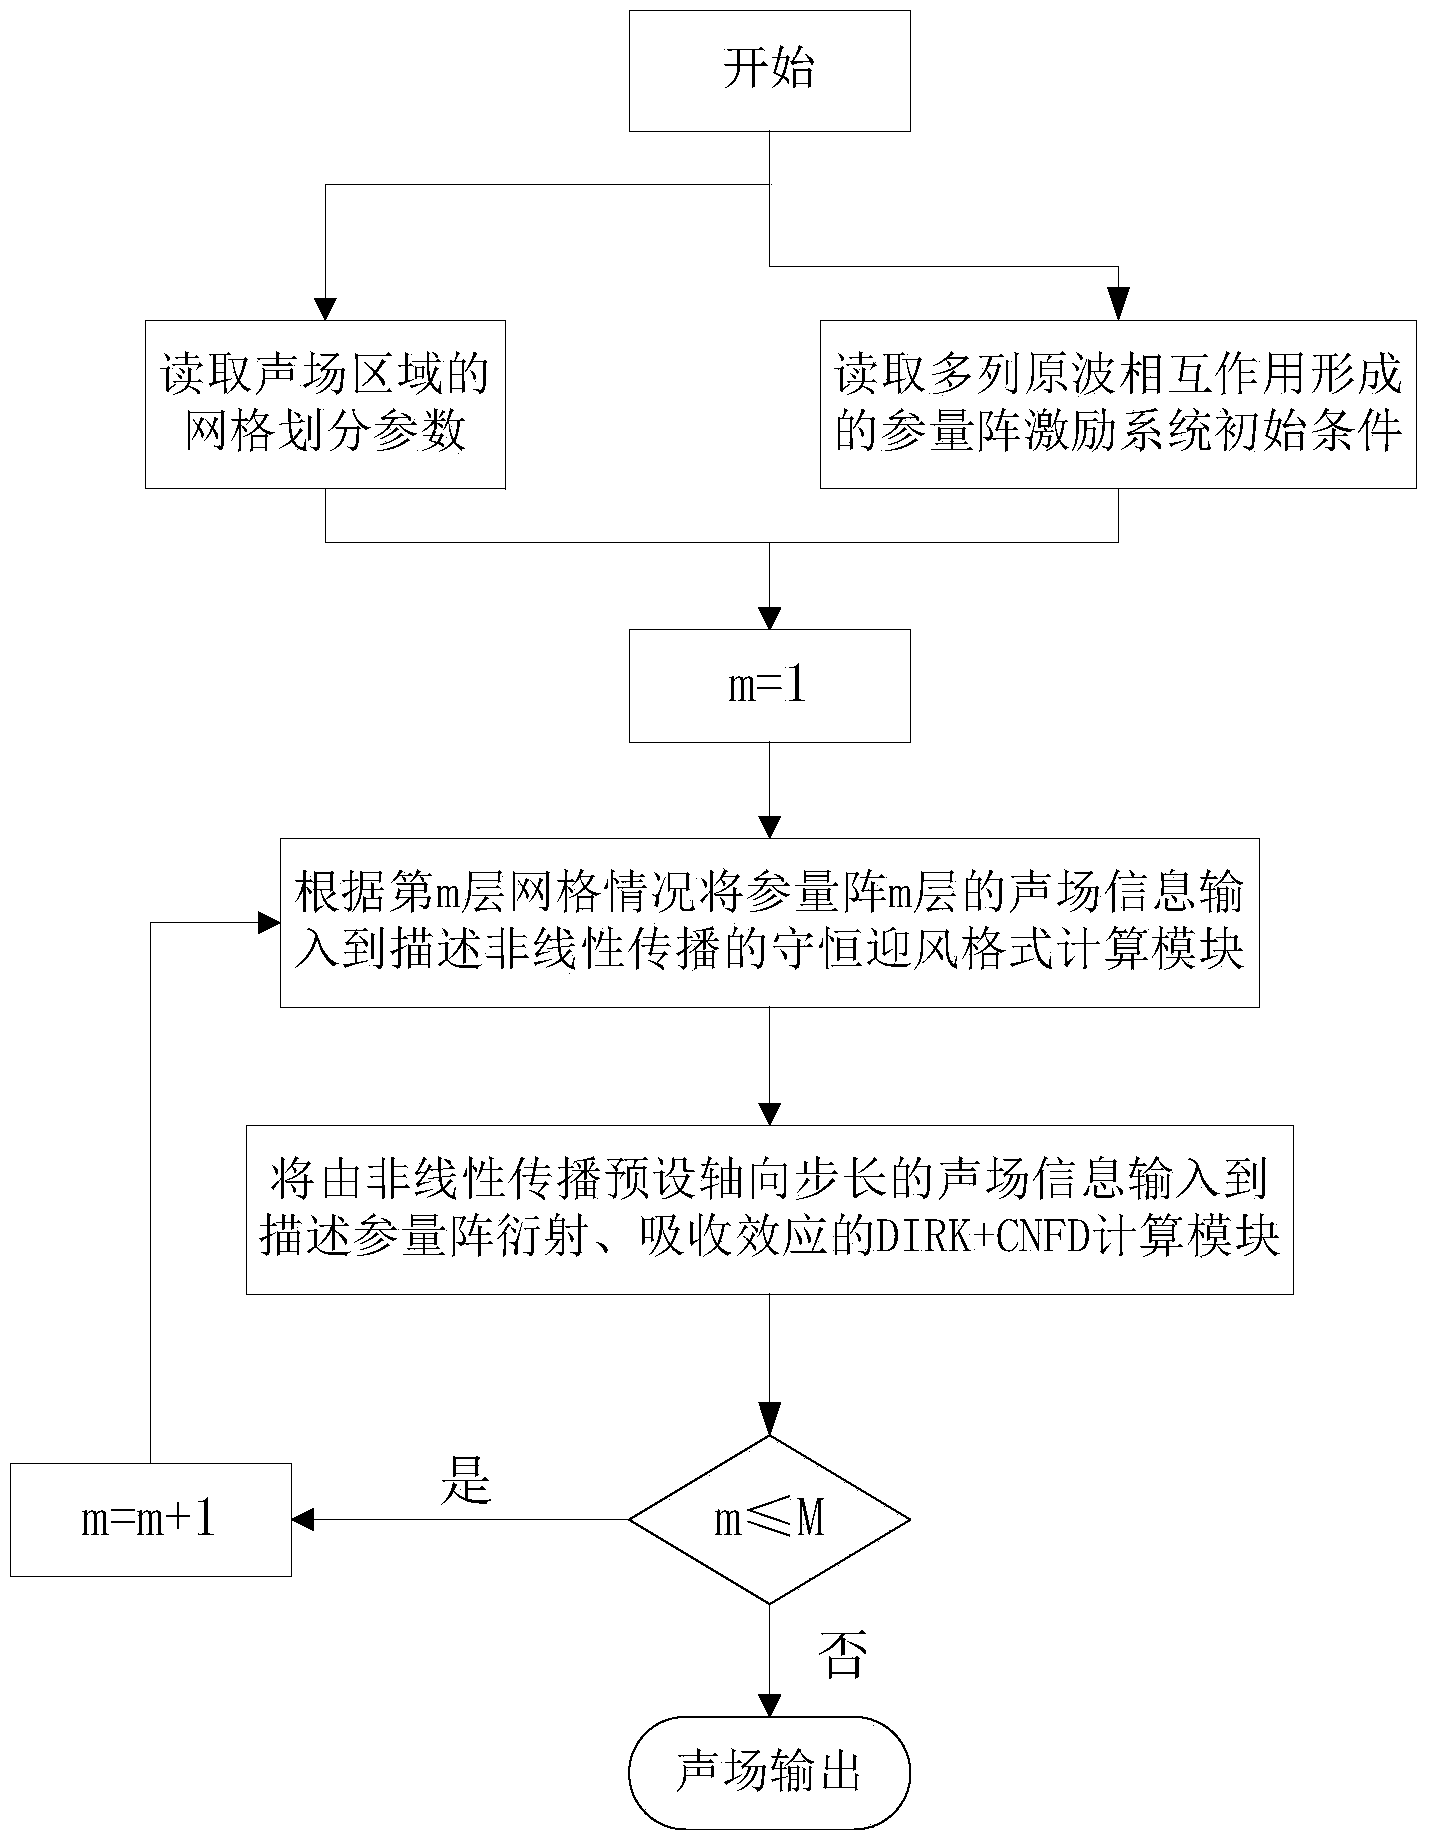 Sound field acquisition method with multi-column arithmetic frequency elementary waves interacting to form parametric arrays